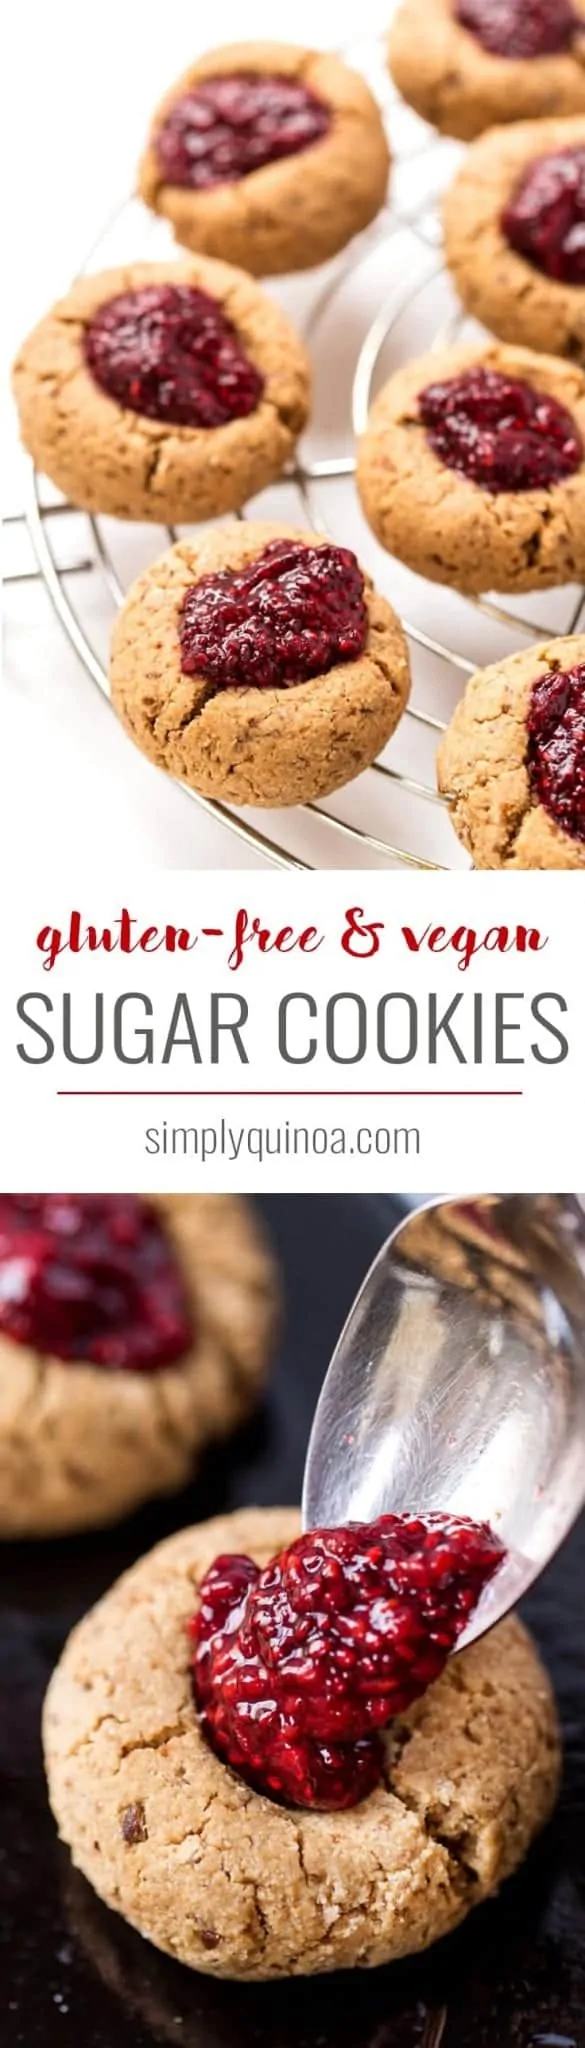 These HEALTHY and Gluten-Free Raspberry Thumbprint Cookies are made with a cashew butter base and topped with homemade raspberry chia seed jam!